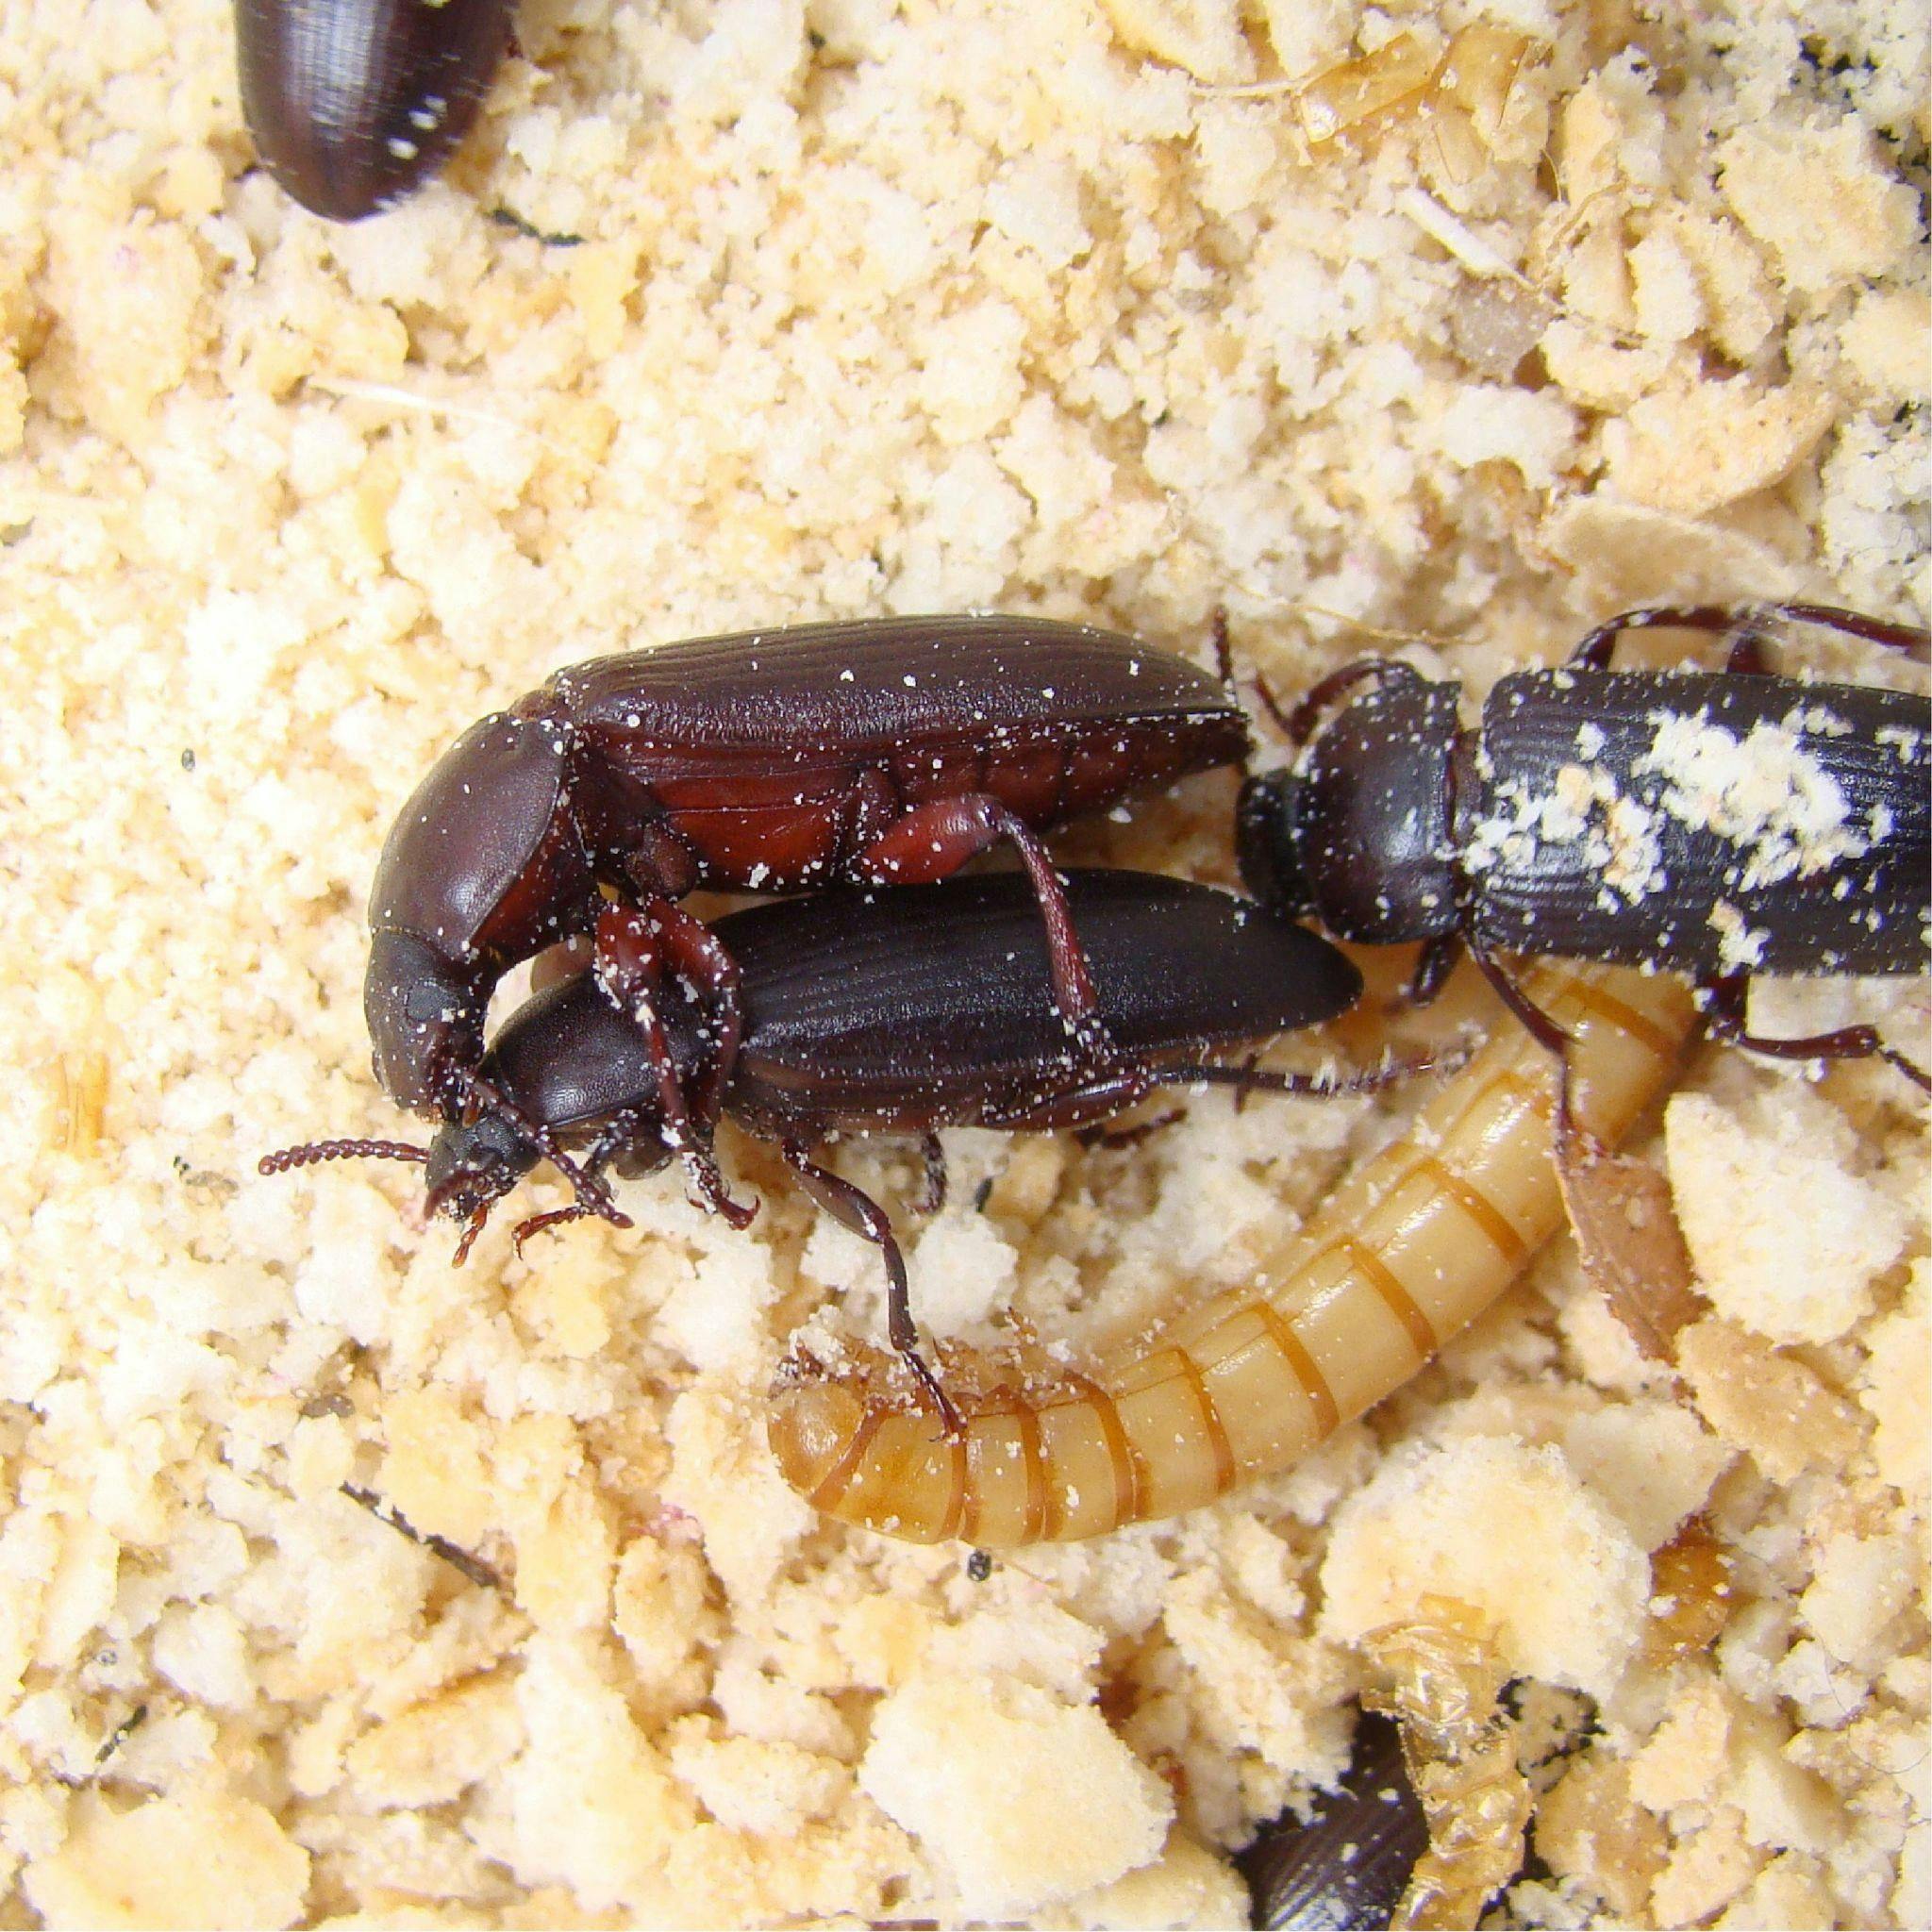 Image 1 for Mealworm & Beetle Starter Pack  by The Bug Factory